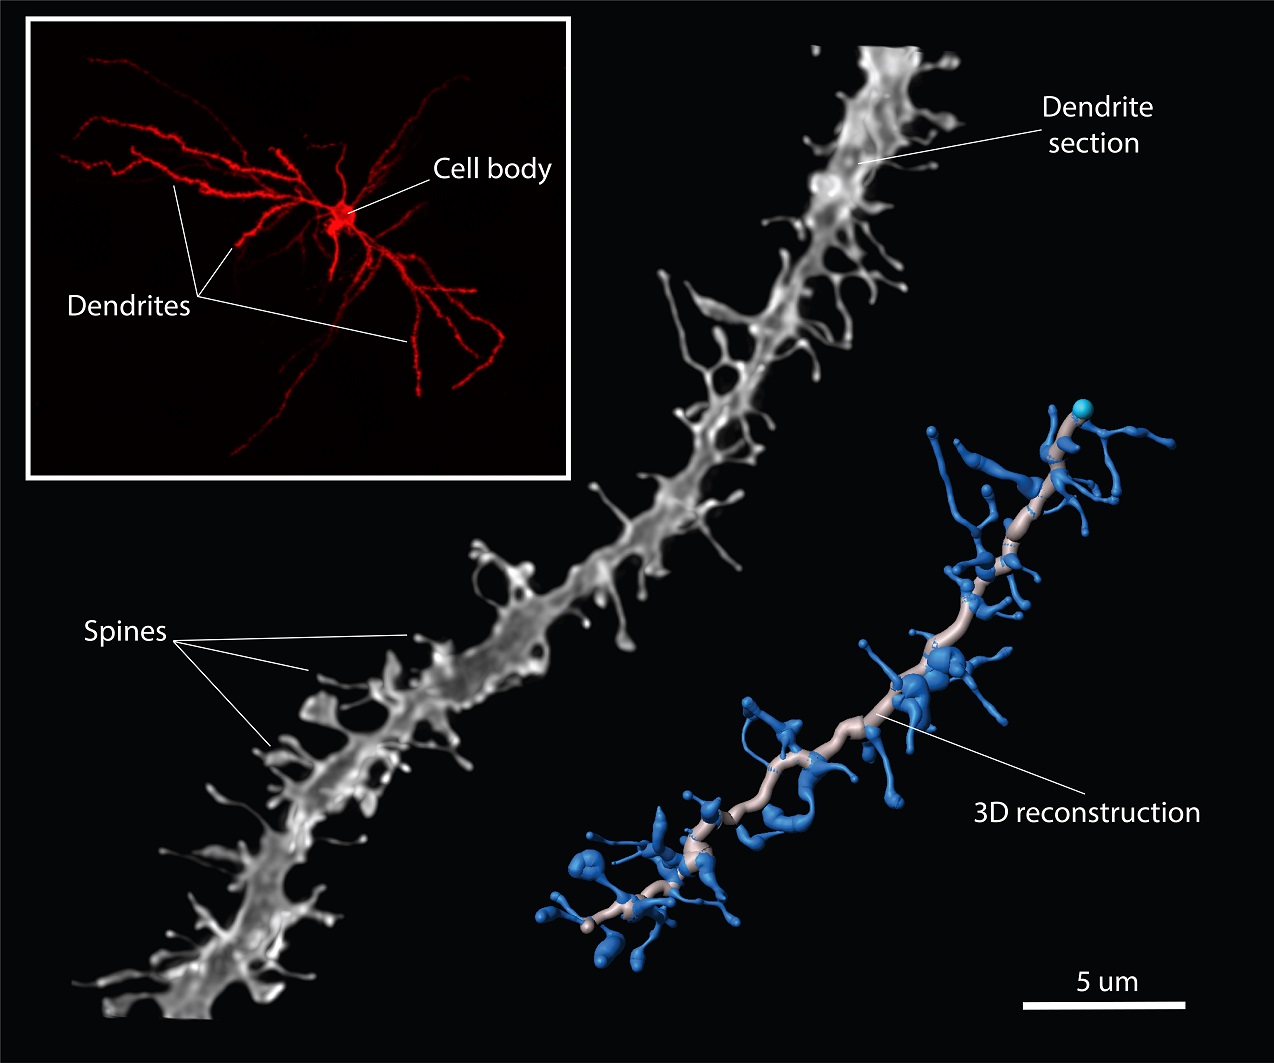 The structure of a neuron. A complete neuron with cell body and multiple dendrites filled with red dye in the top left. A magnification of a section of a dendrite with a lot of spines visible. And a 3D reconstruction of the middle part of the dendrite section.